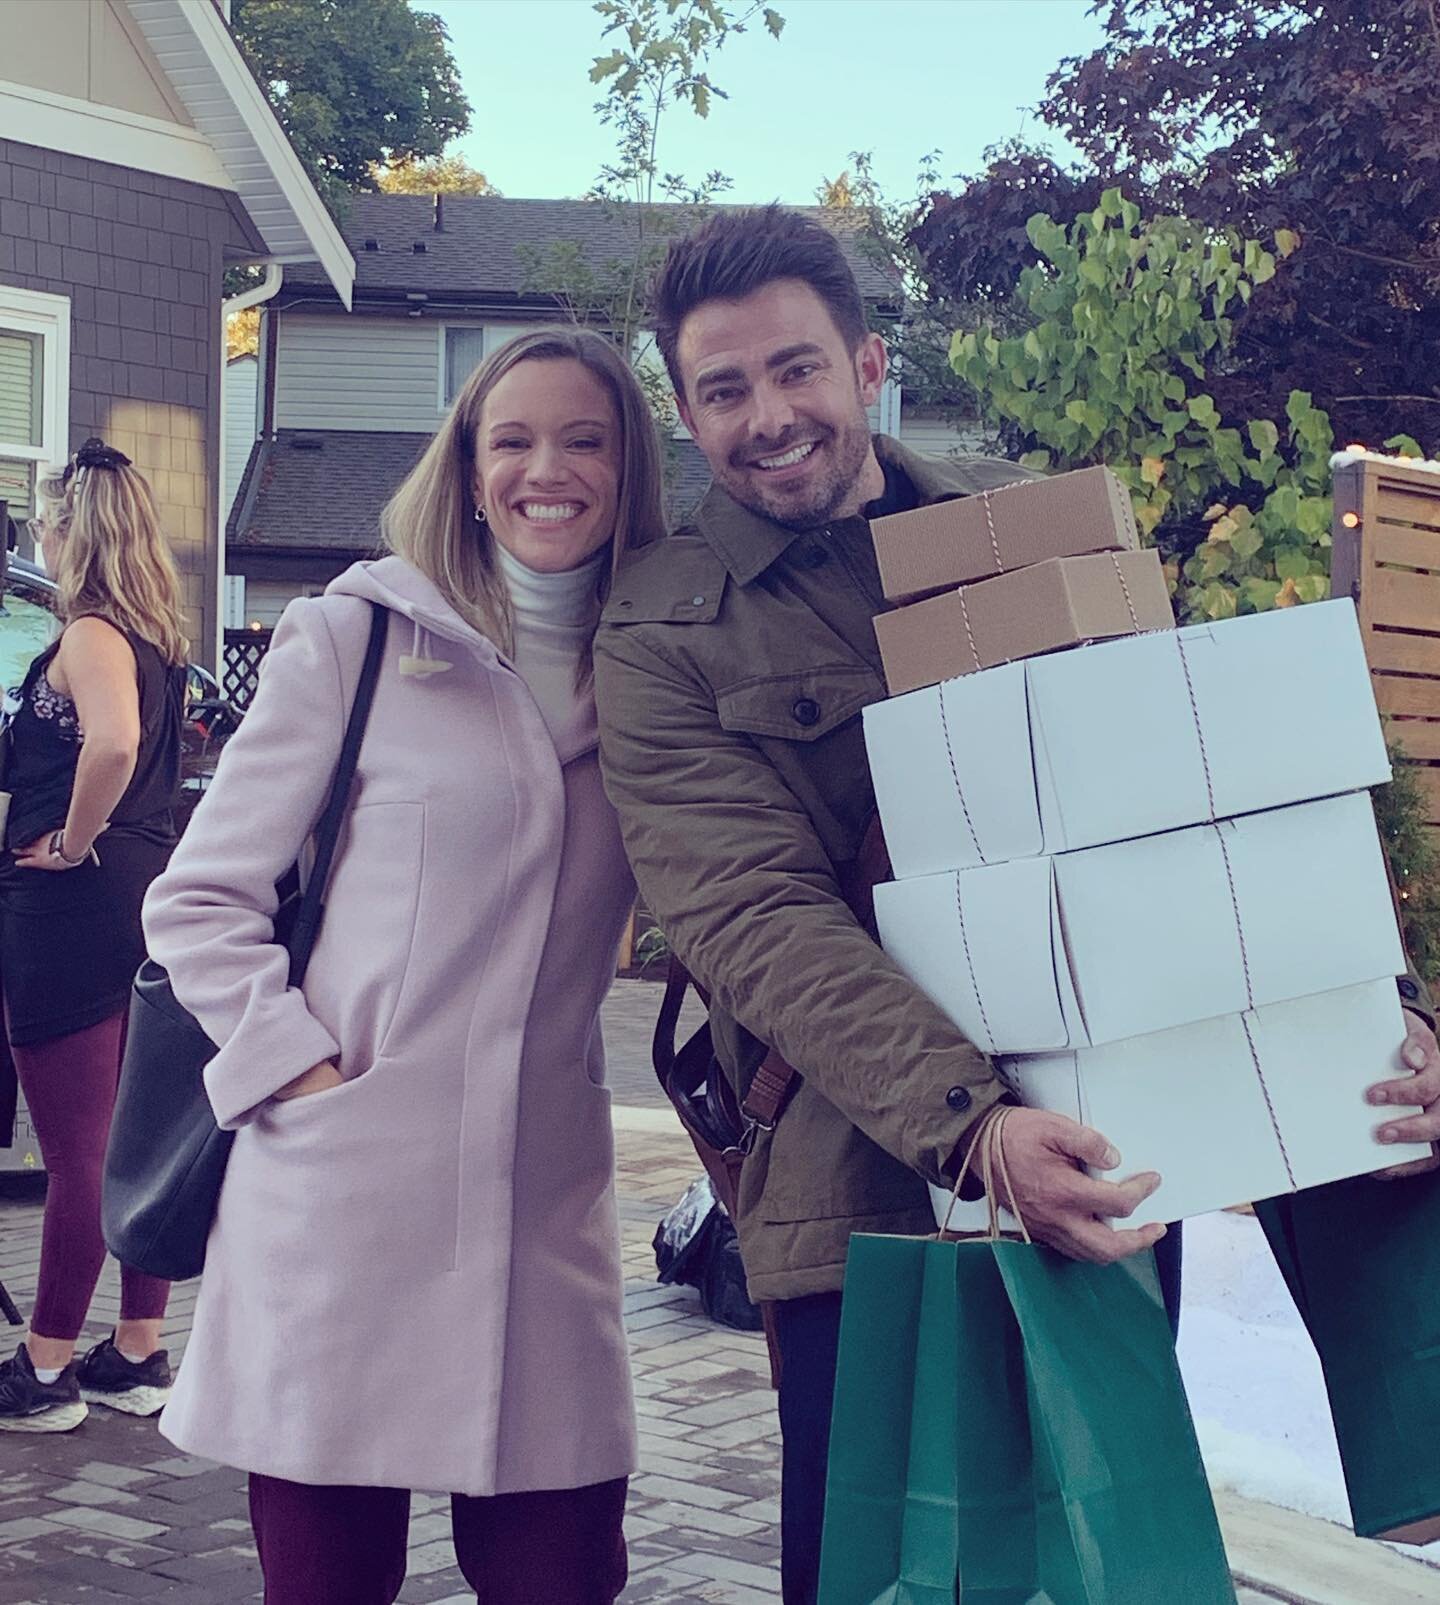 When I Think Of Christmas premieres tonight on @hallmarkchannel! Don&rsquo;t panic, @jonathandbennett is bringing the chocolate frosted cookies 🍪#CountdownToChristmas #Hallmark